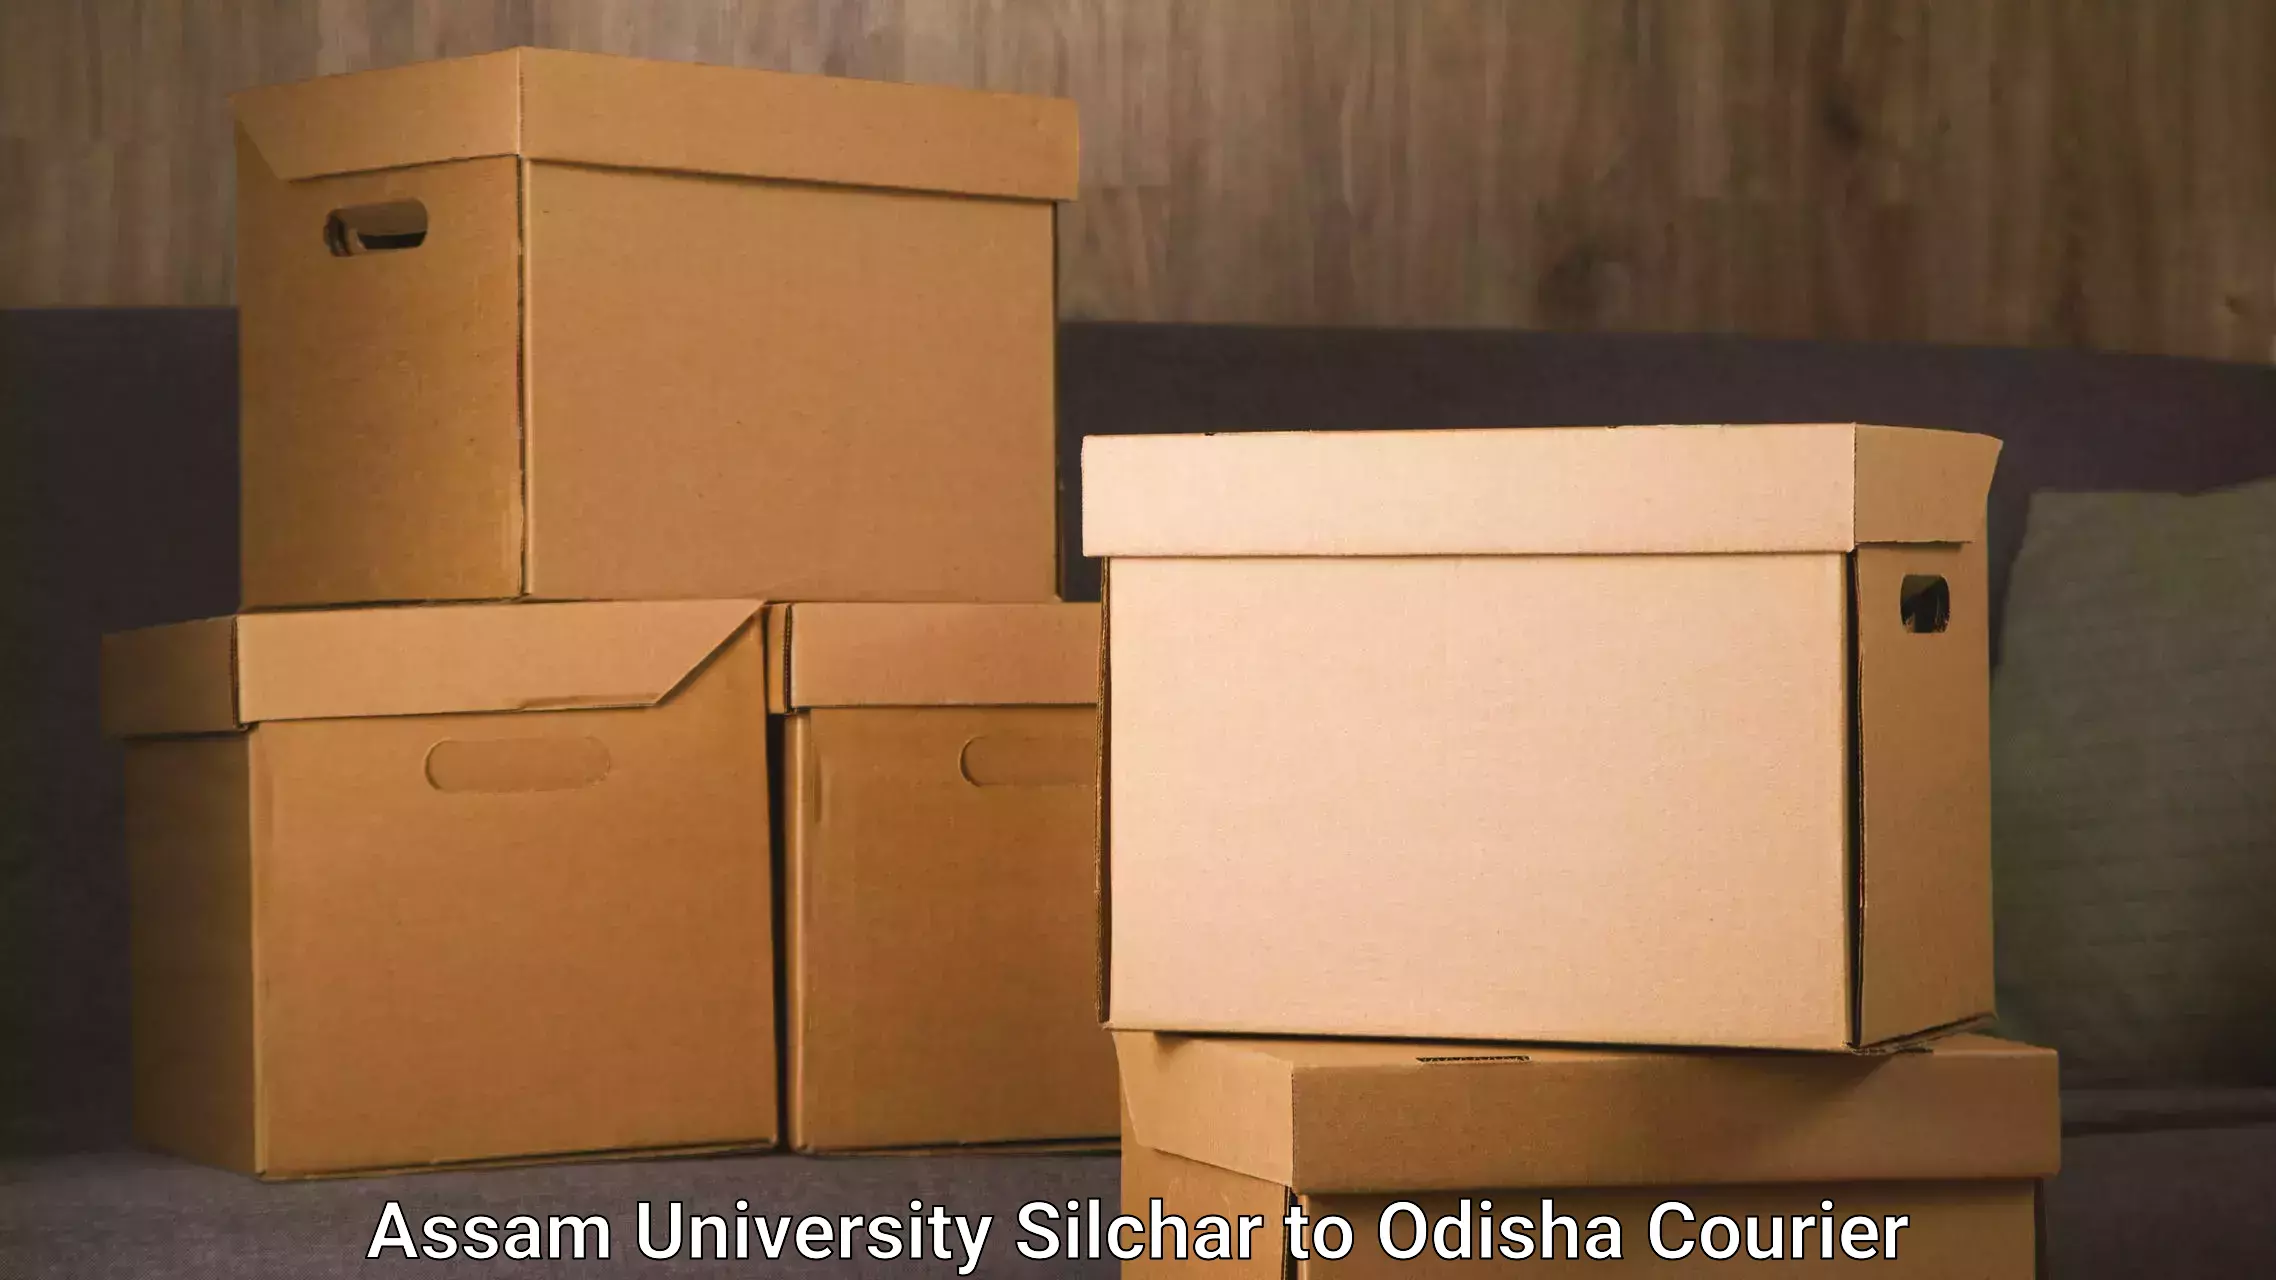 Express package services Assam University Silchar to Kupari